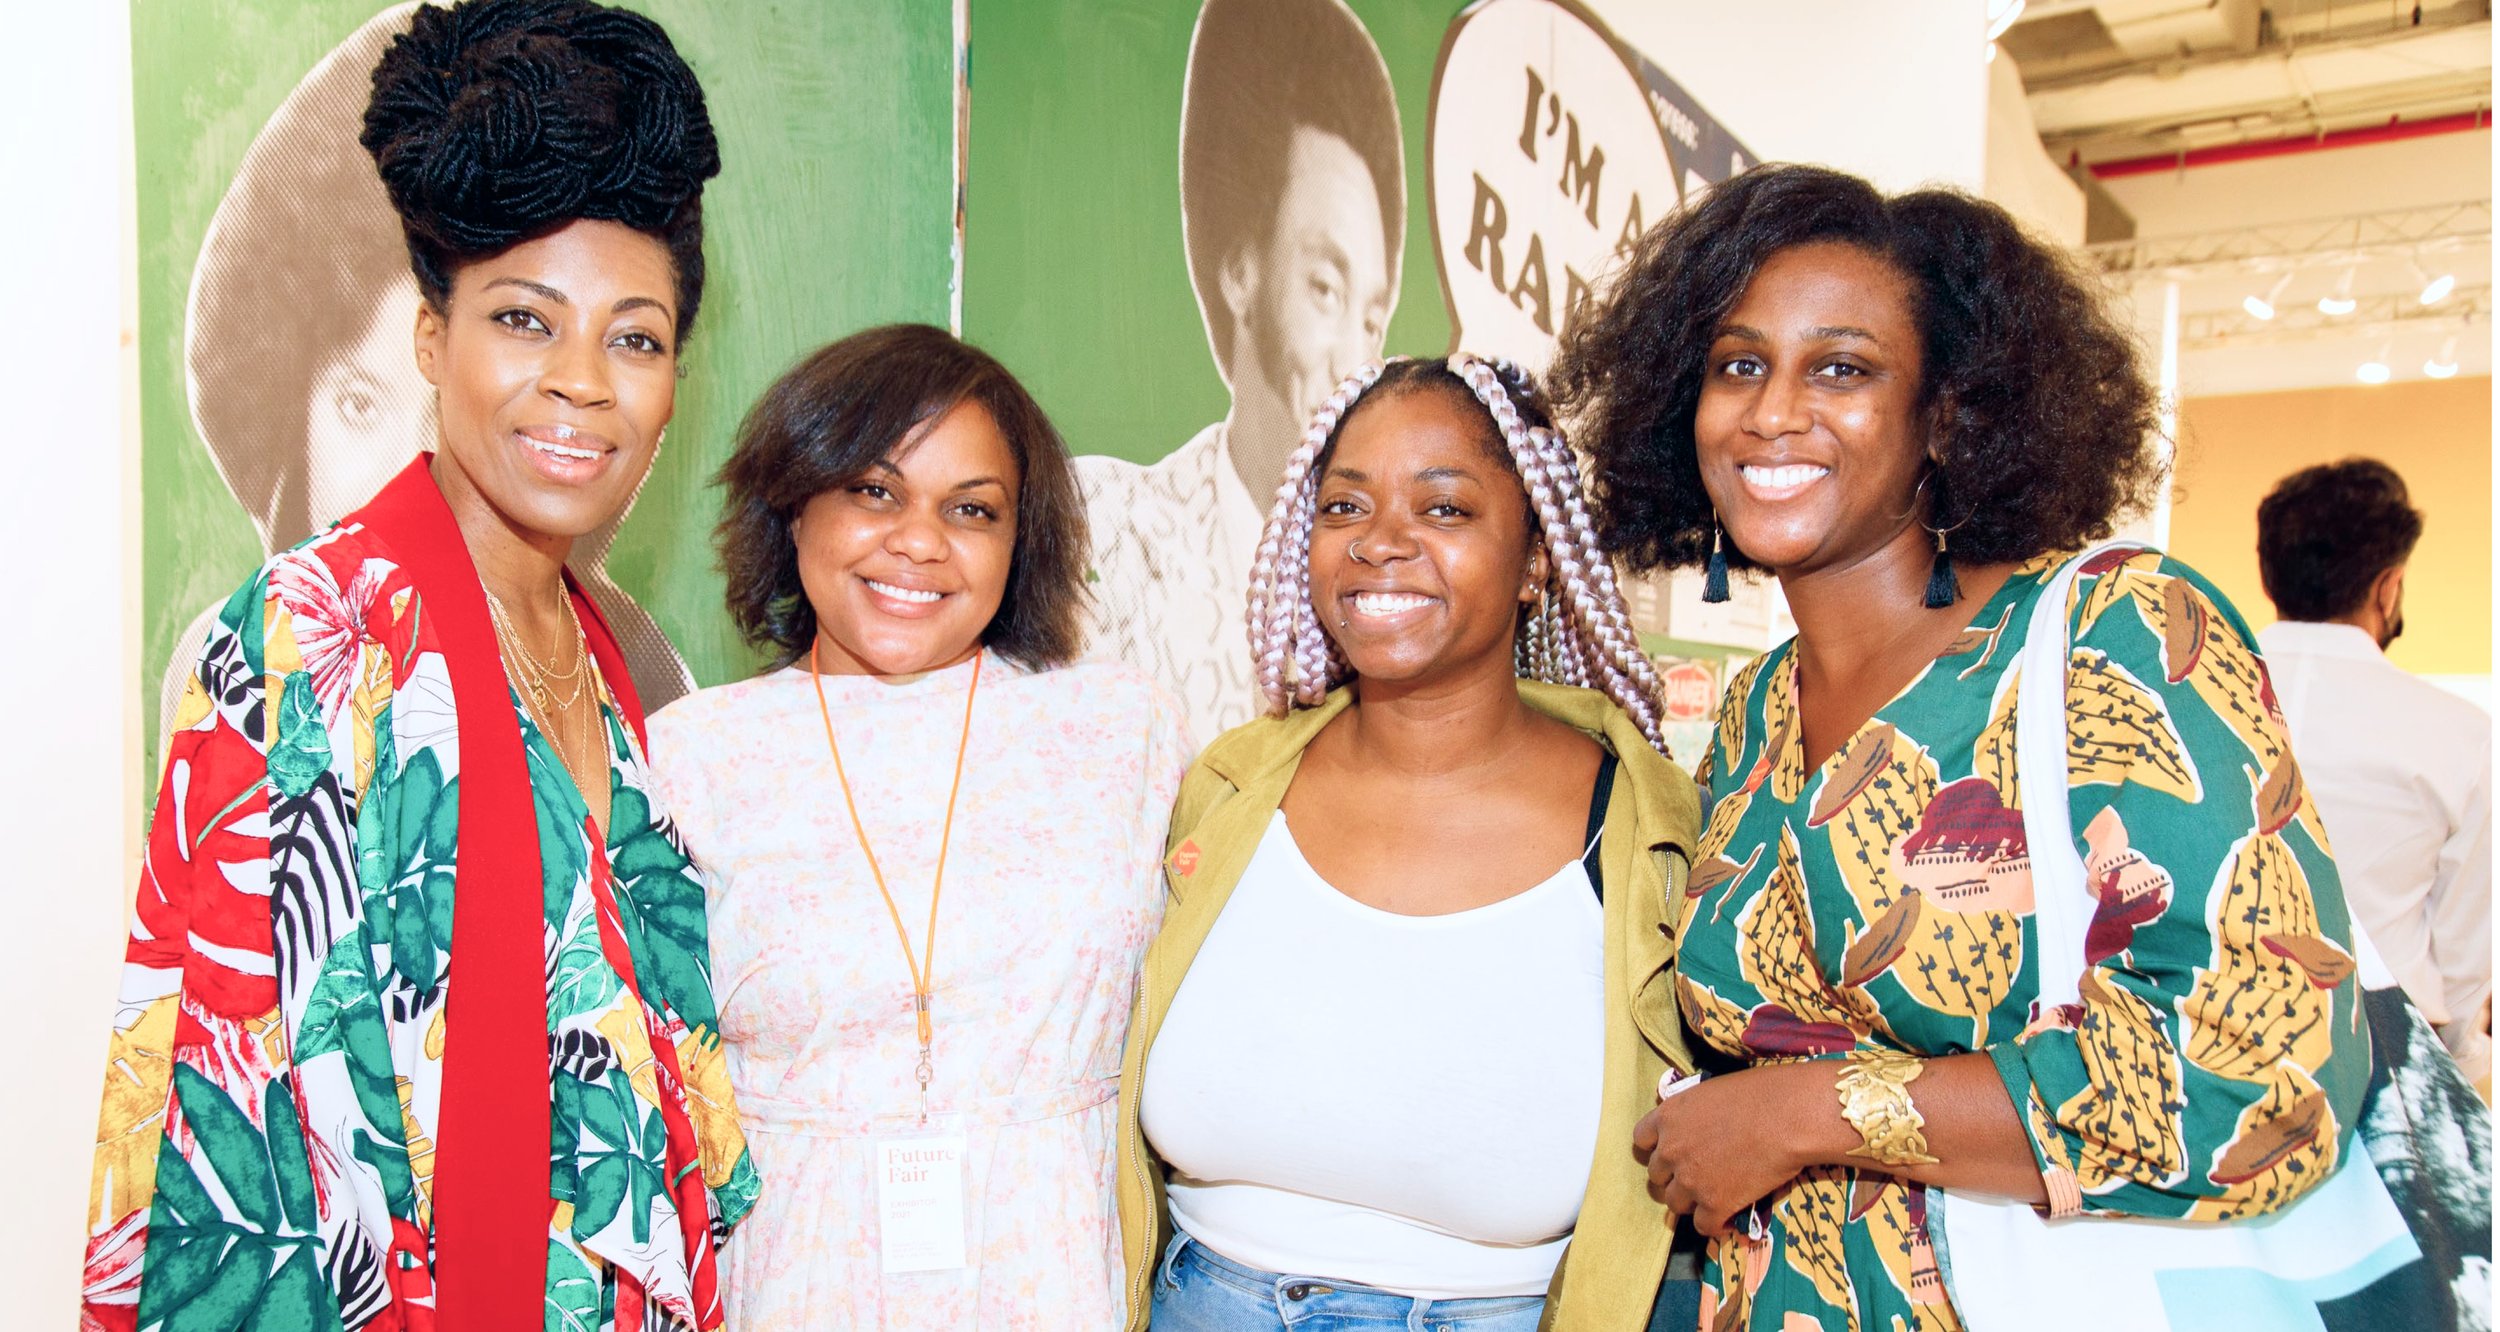  From left to right: Marryam Moma, Dominique Clayton, Tasha Dougé, and Mikhaile Solomon inside the booth of Dominique Gallery (Los Angeles) © David Willems Photography 